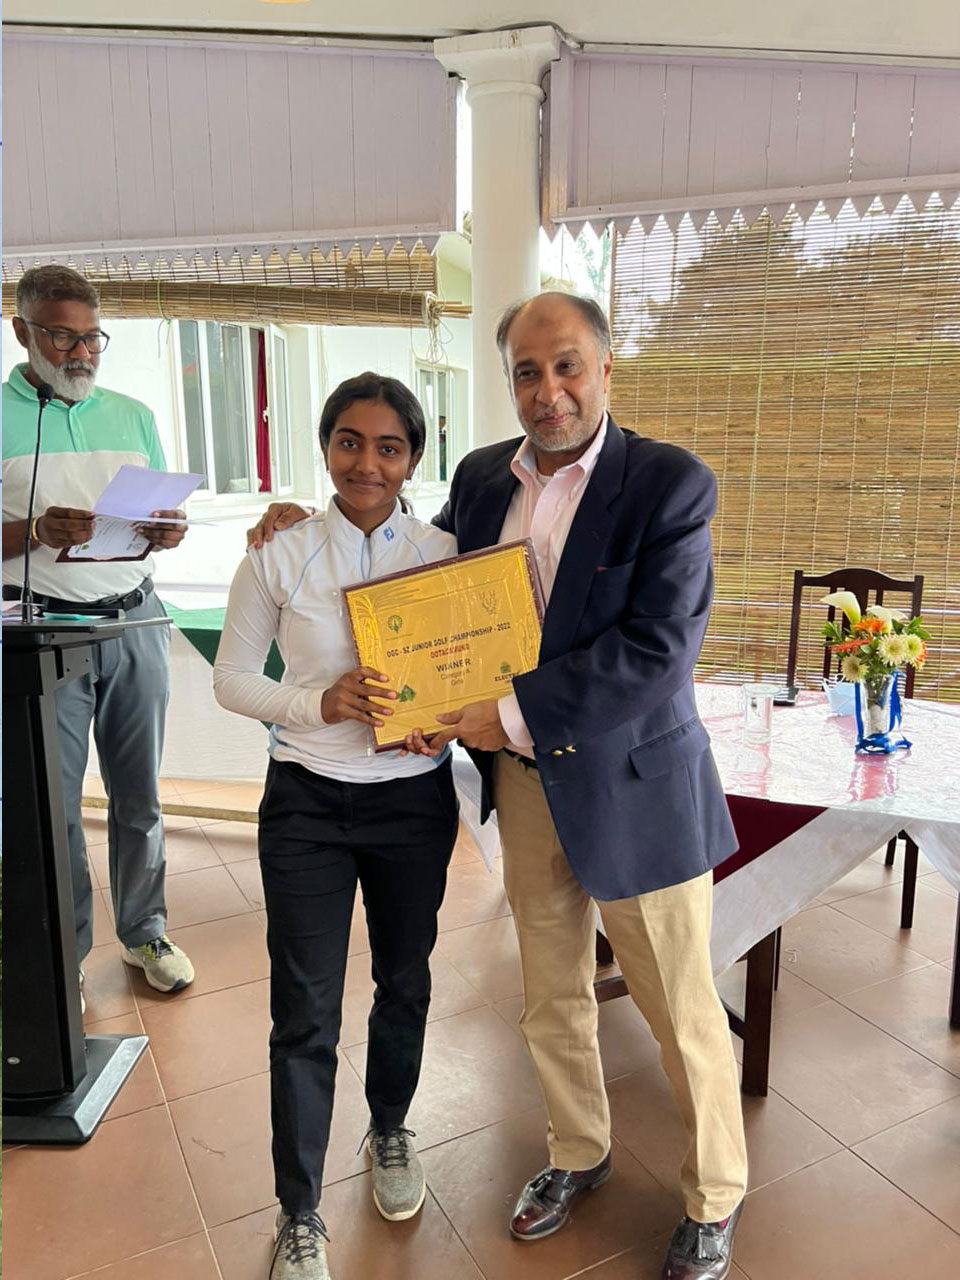 Ananthi Vivek won in A category girls division at the SZ Junior Golf Championship